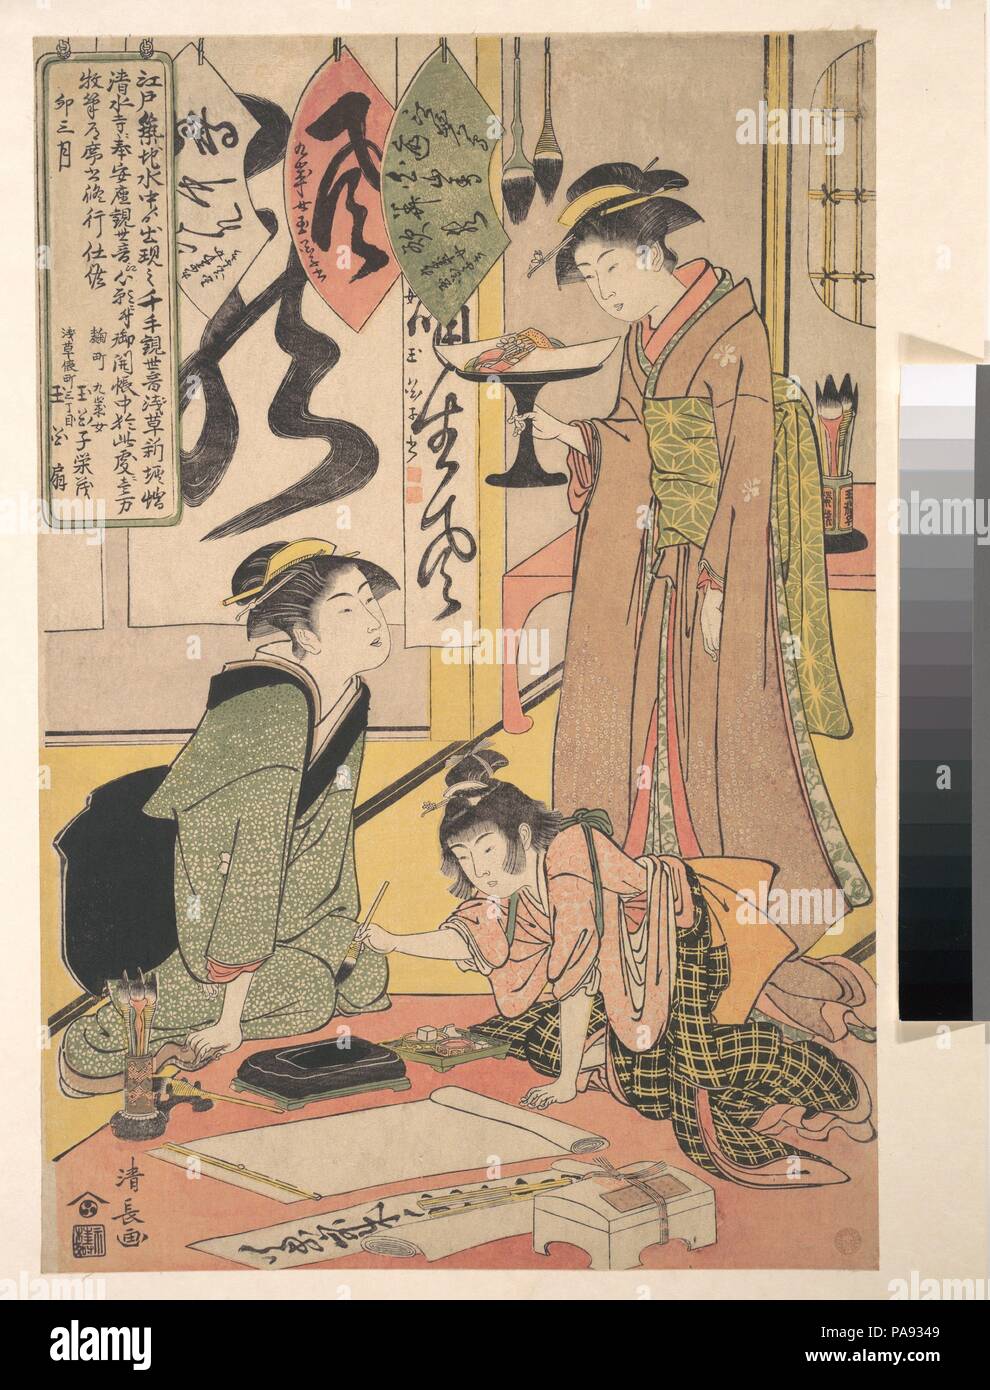 Gyoku-kashi Eimo Preparing Calligraphy Offerings. Artist: Torii Kiyonaga (Japanese, 1752-1815). Culture: Japan. Dimensions: 15 1/8 × 10 1/4 in. (38.4 × 26 cm). Date: ca. 1782.  A resident of Koji machi (Koji Street), nine-year-old Gyoku-kashi Eimo is pictured making one thousand writings to present to Senso ji Temple in Asakusa, to show earnestness in her effort to acquire skill as a calligrapher. Her mother looks on, and her teenage sister, Gyoku-kasen, brings ornamental cakes on a lacquer stand. Museum: Metropolitan Museum of Art, New York, USA. Stock Photo